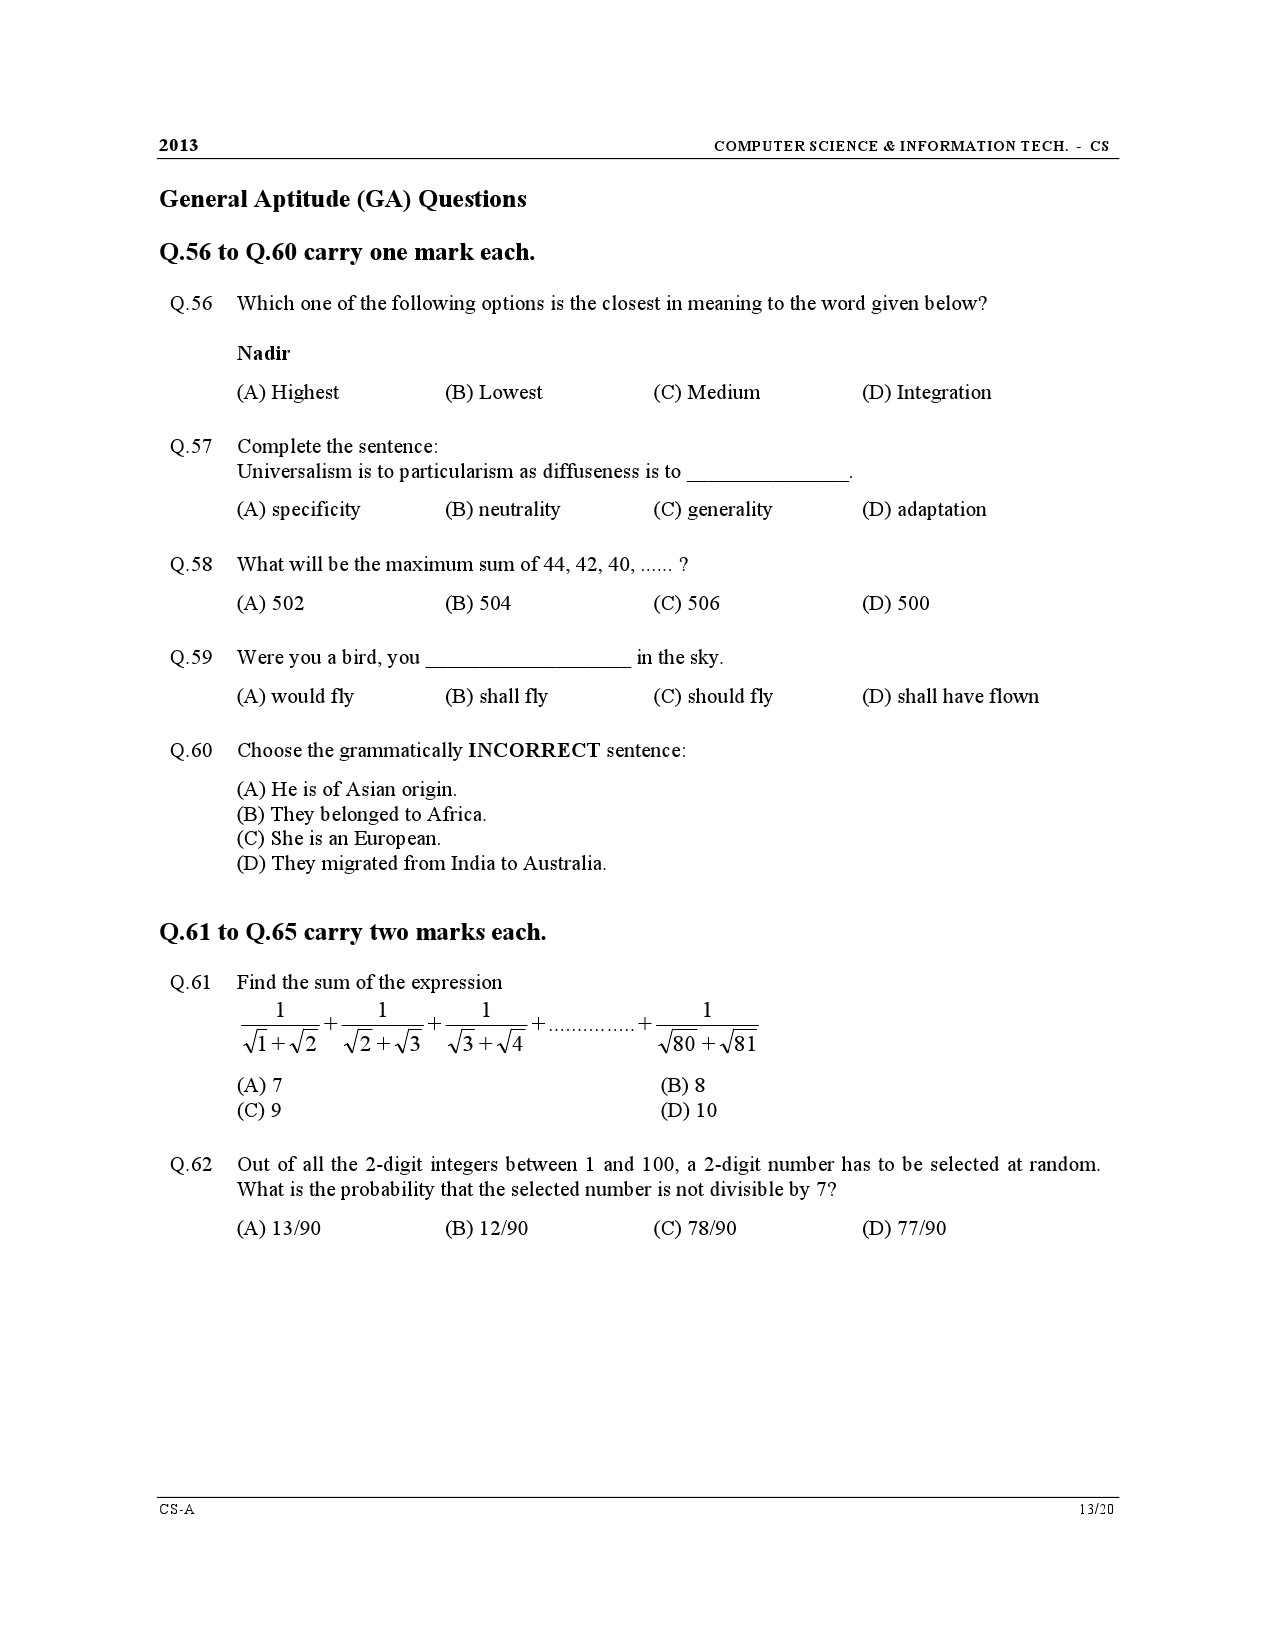 GATE Exam Question Paper 2013 Computer Science and Information Technology 13